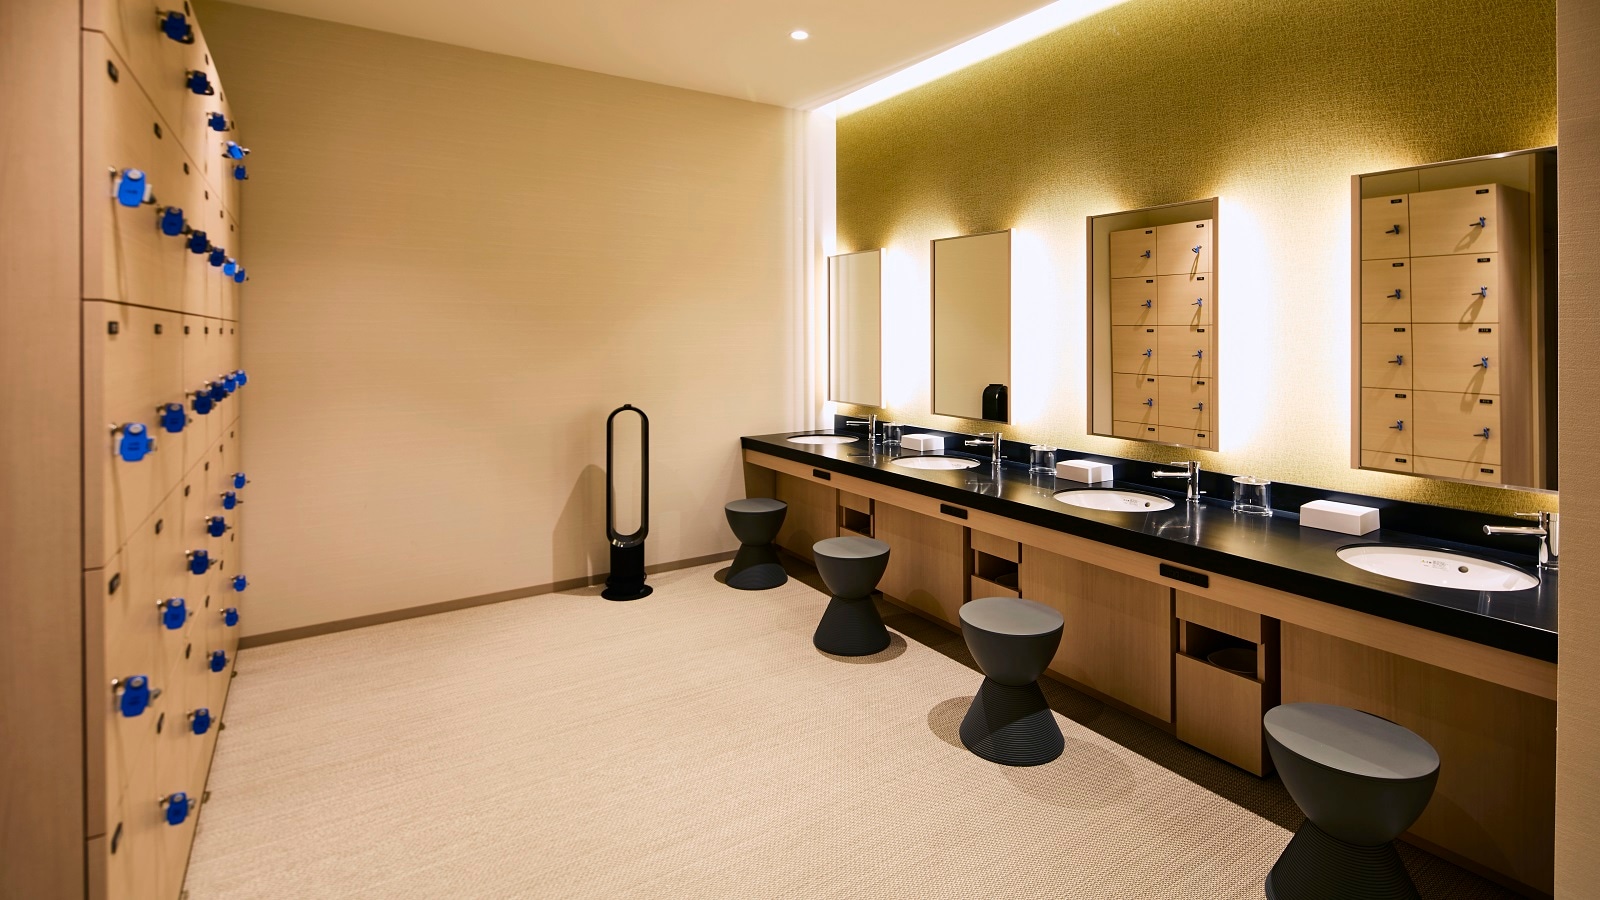 A large public bath/dressing room to soothe the weariness of your trip